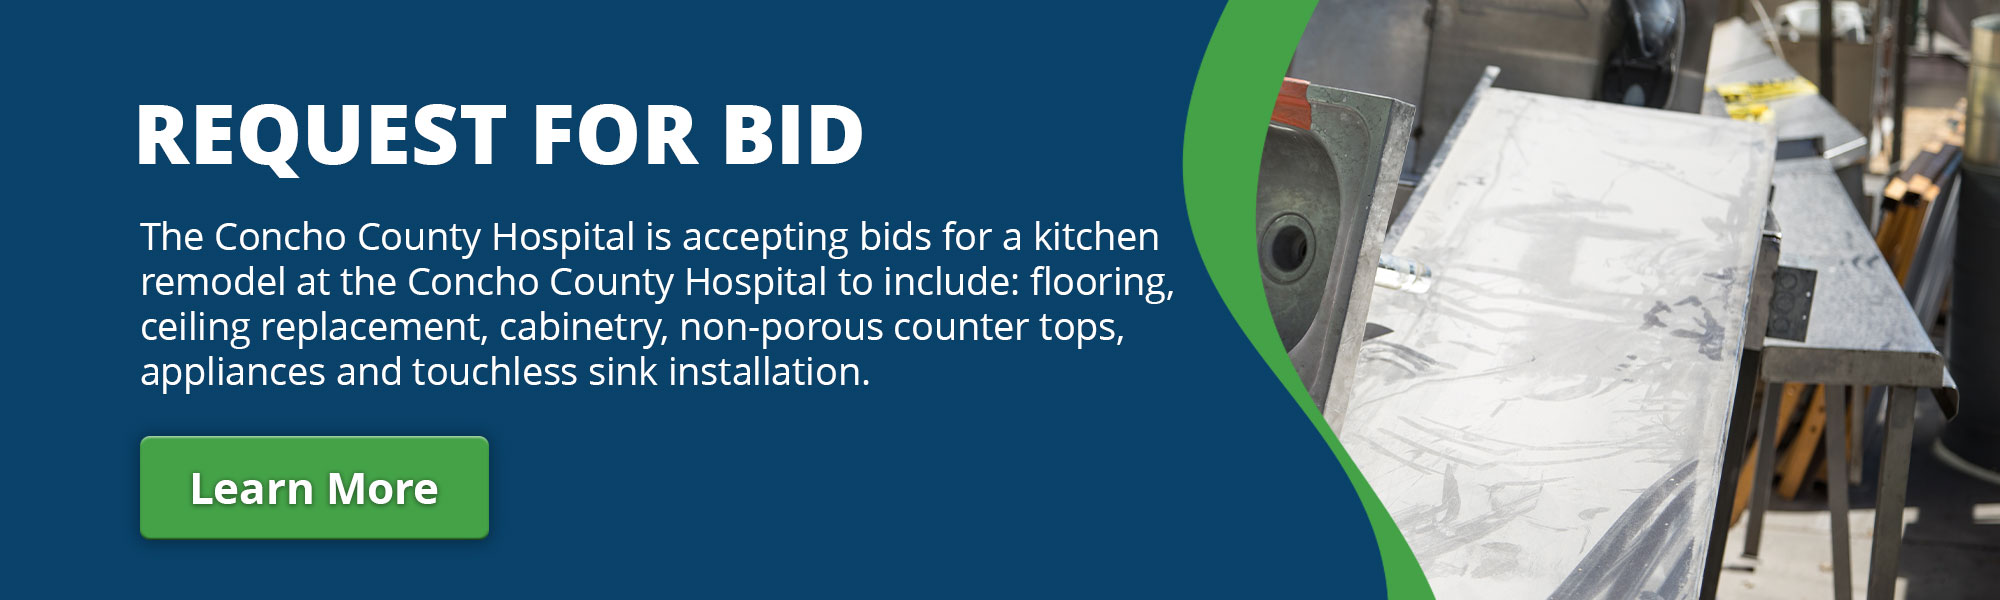 REQUEST FOR BID

The Concho County Hospital is accepting bids for a kitchen remodel at the Concho County Hospital to include: flooring, ceiling replacement, cabinetry, non-porous counter tops, appliances and touchless sink installation.

Learn More